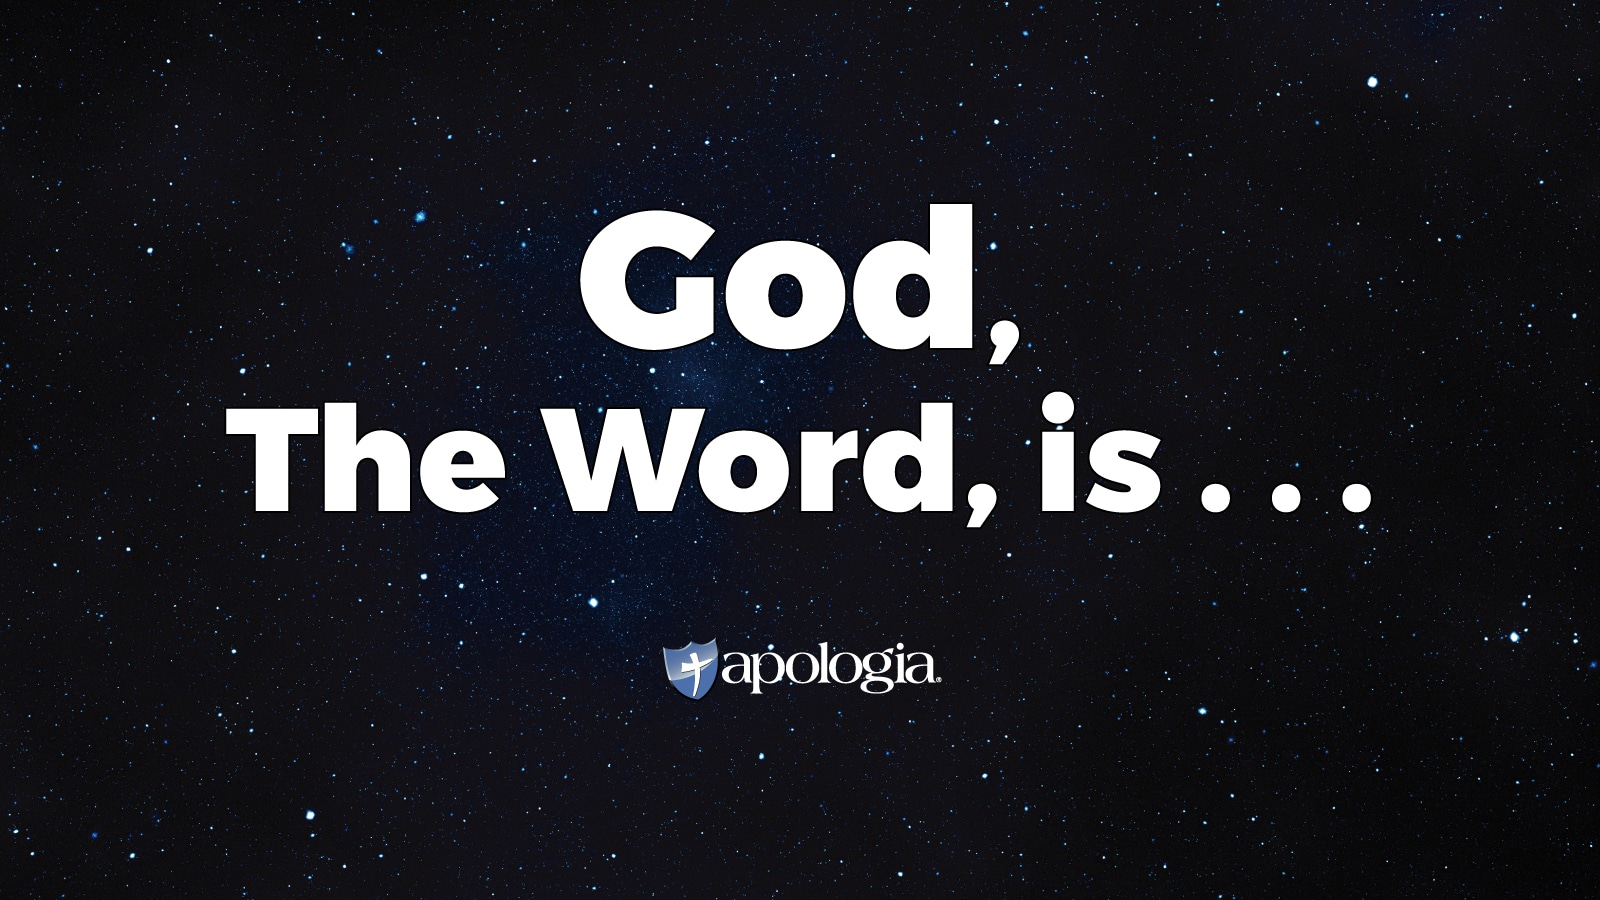 God, The Word, is…